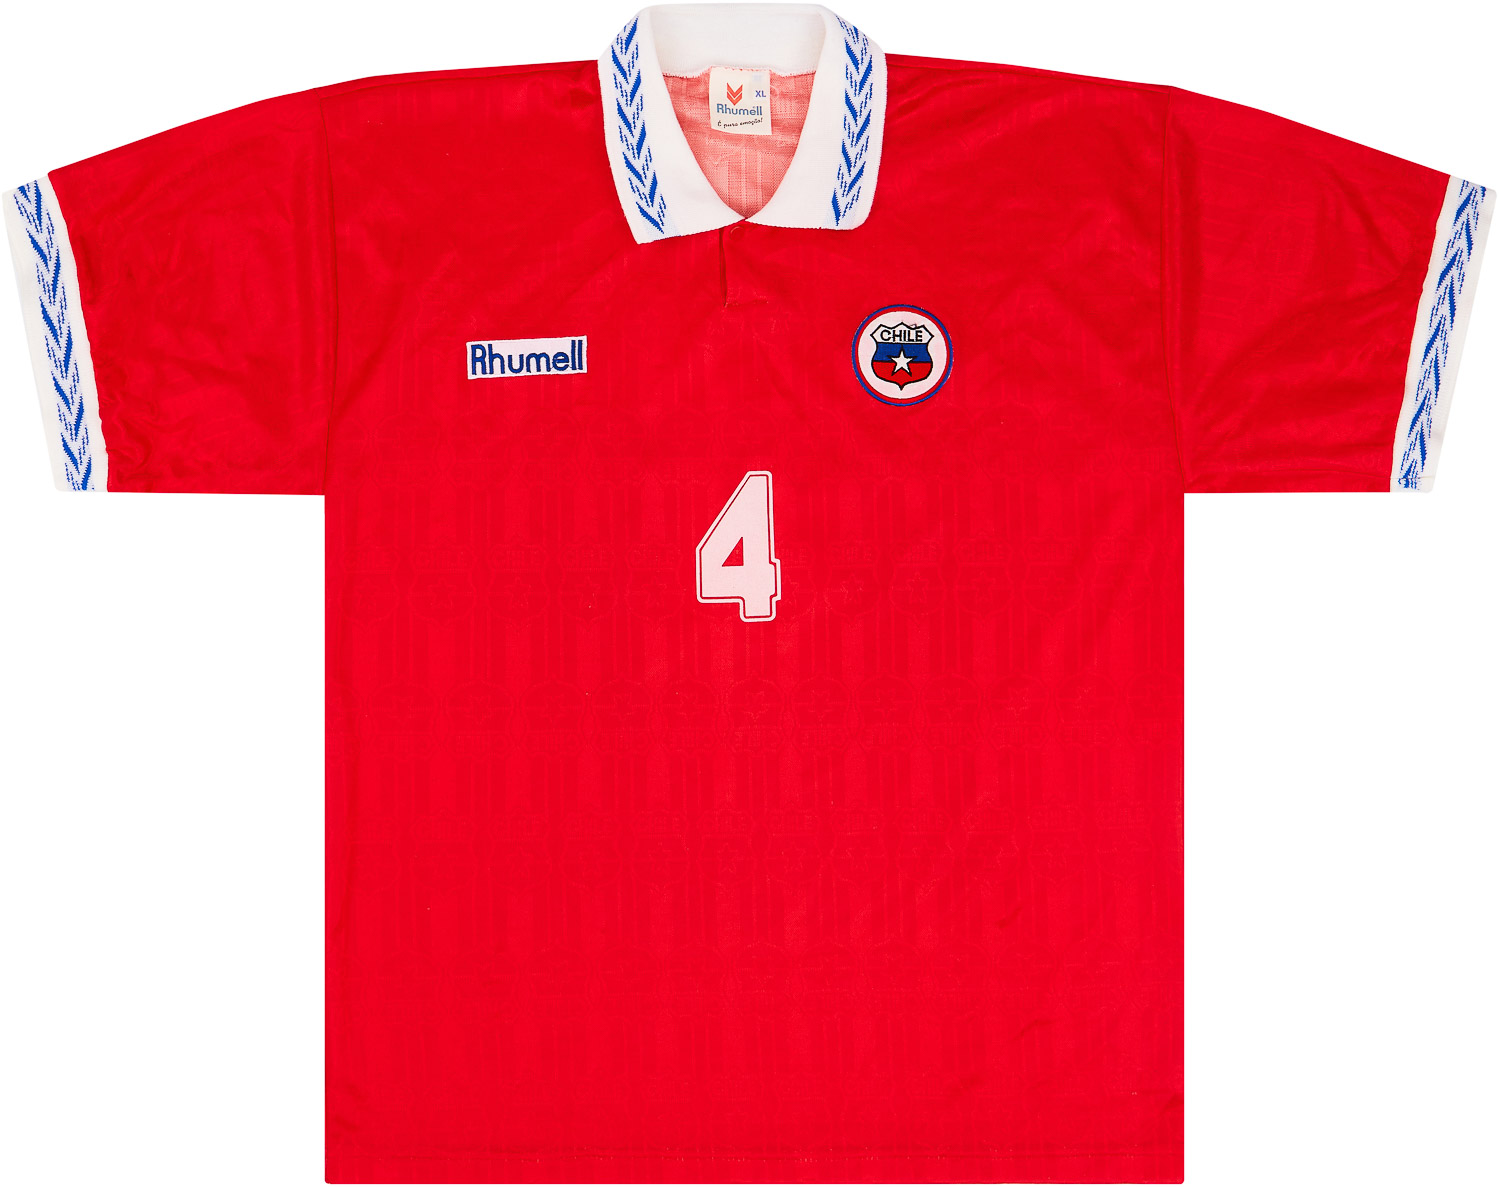 1995-96 Chile Match Issue Home Shirt #4